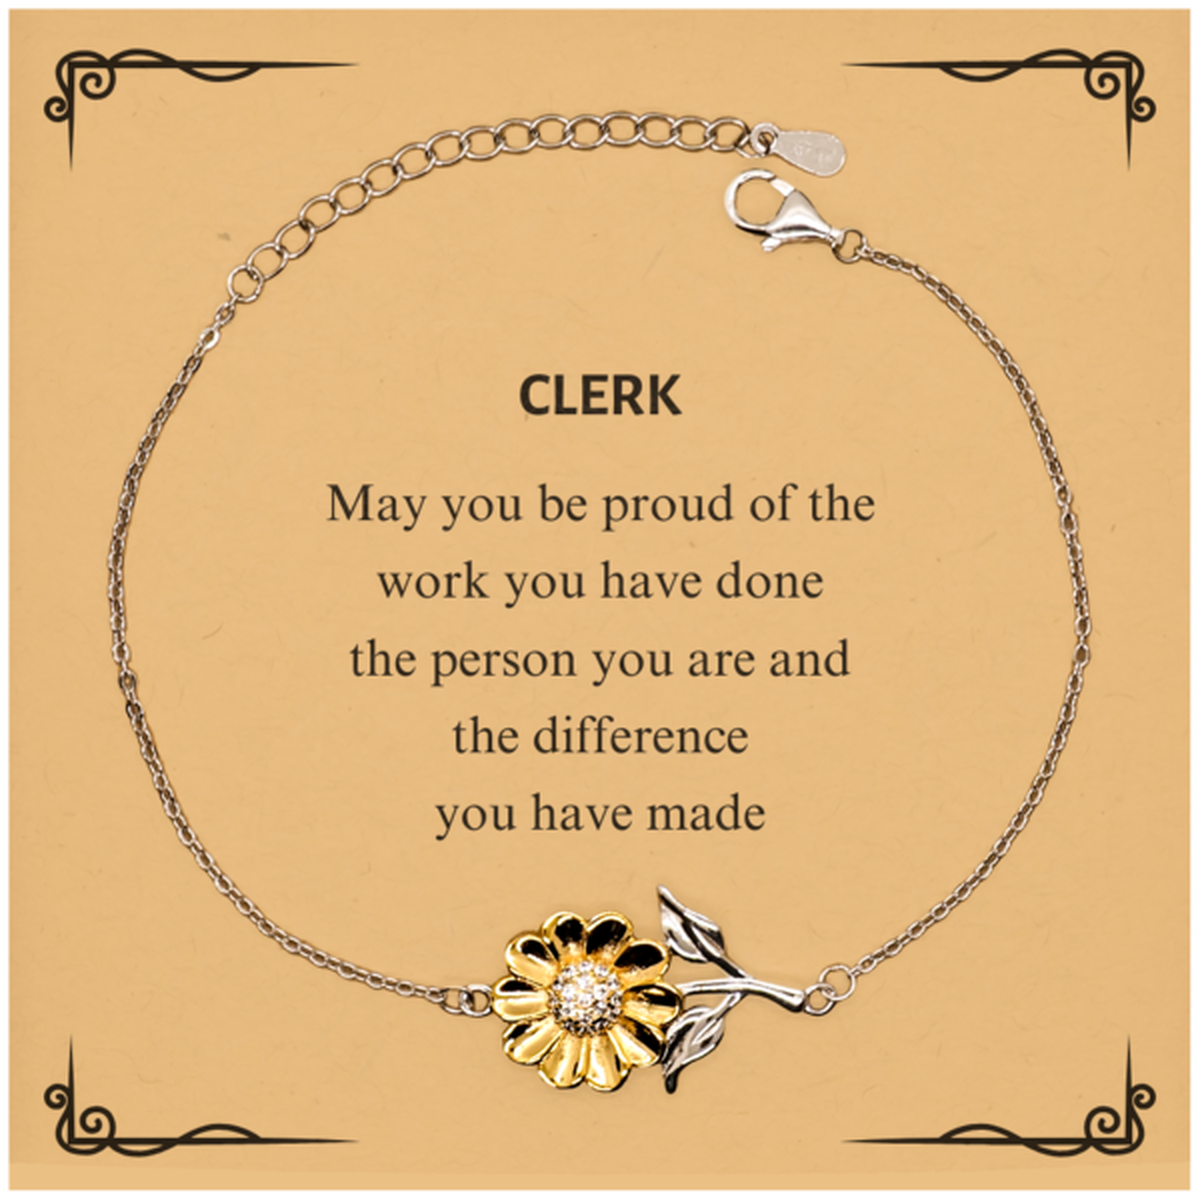 Clerk May you be proud of the work you have done, Retirement Clerk Sunflower Bracelet for Colleague Appreciation Gifts Amazing for Clerk